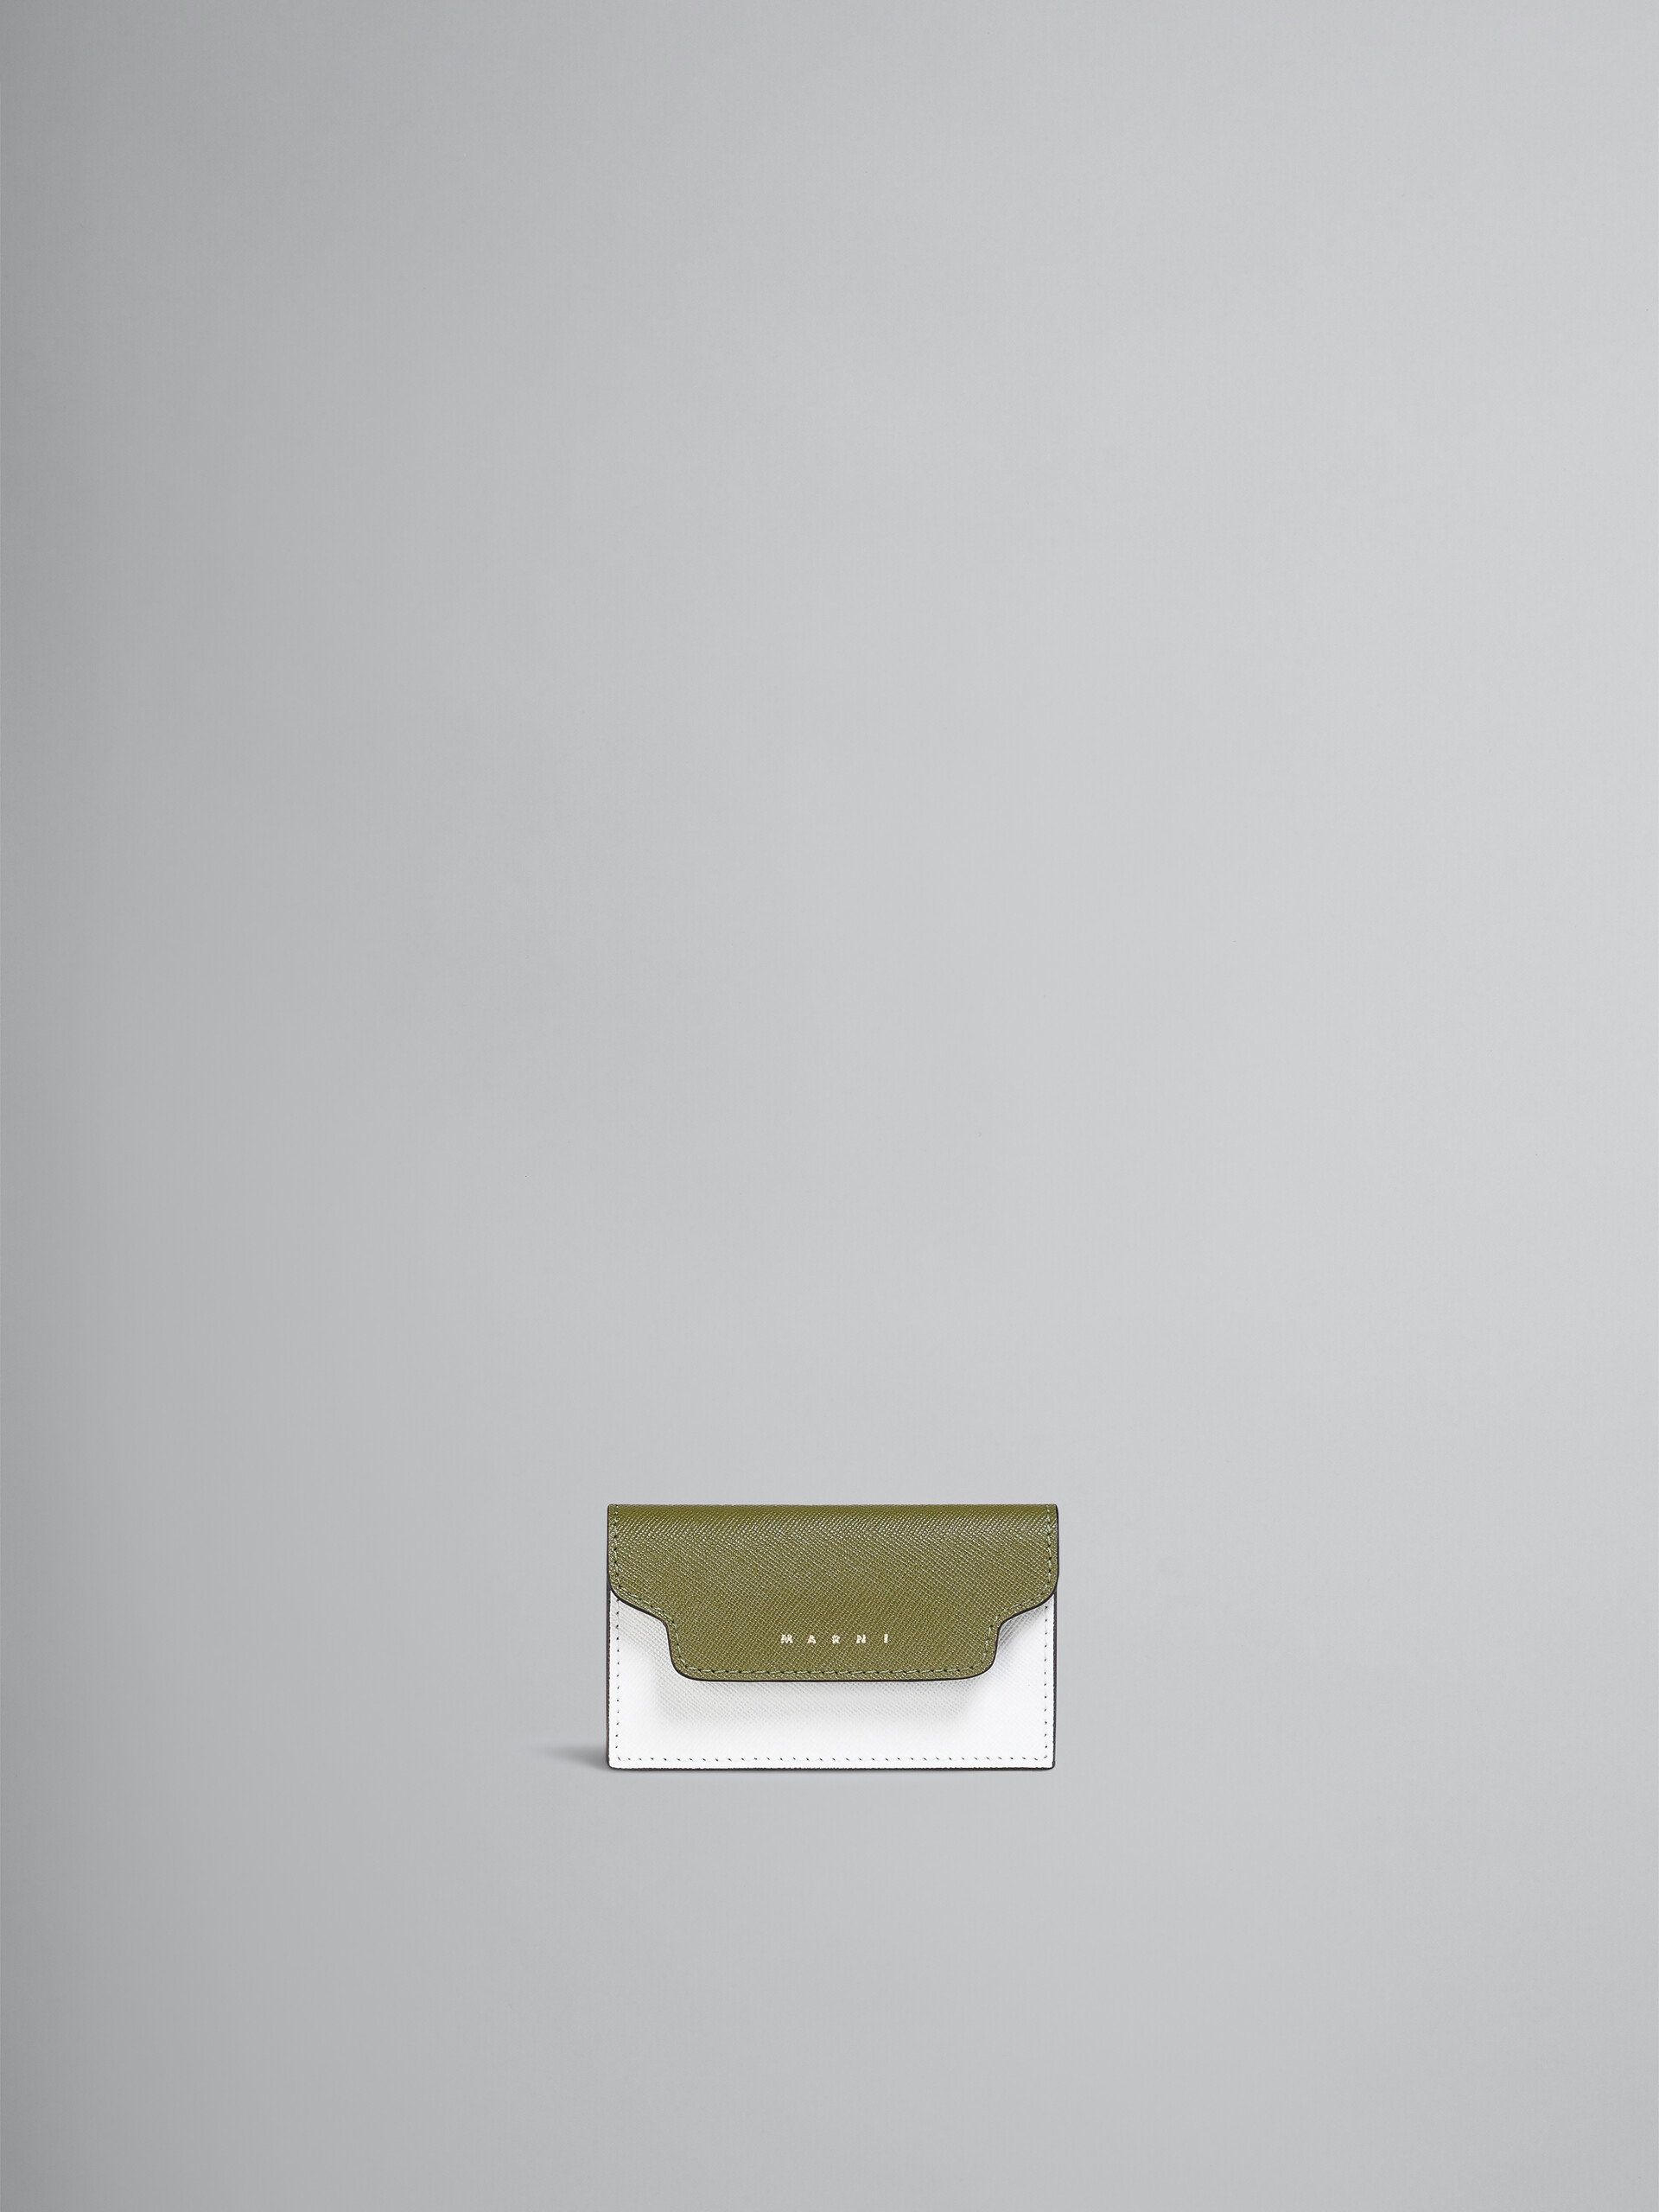 Tone on tone green and white saffiano business card case - Wallets - Image 1